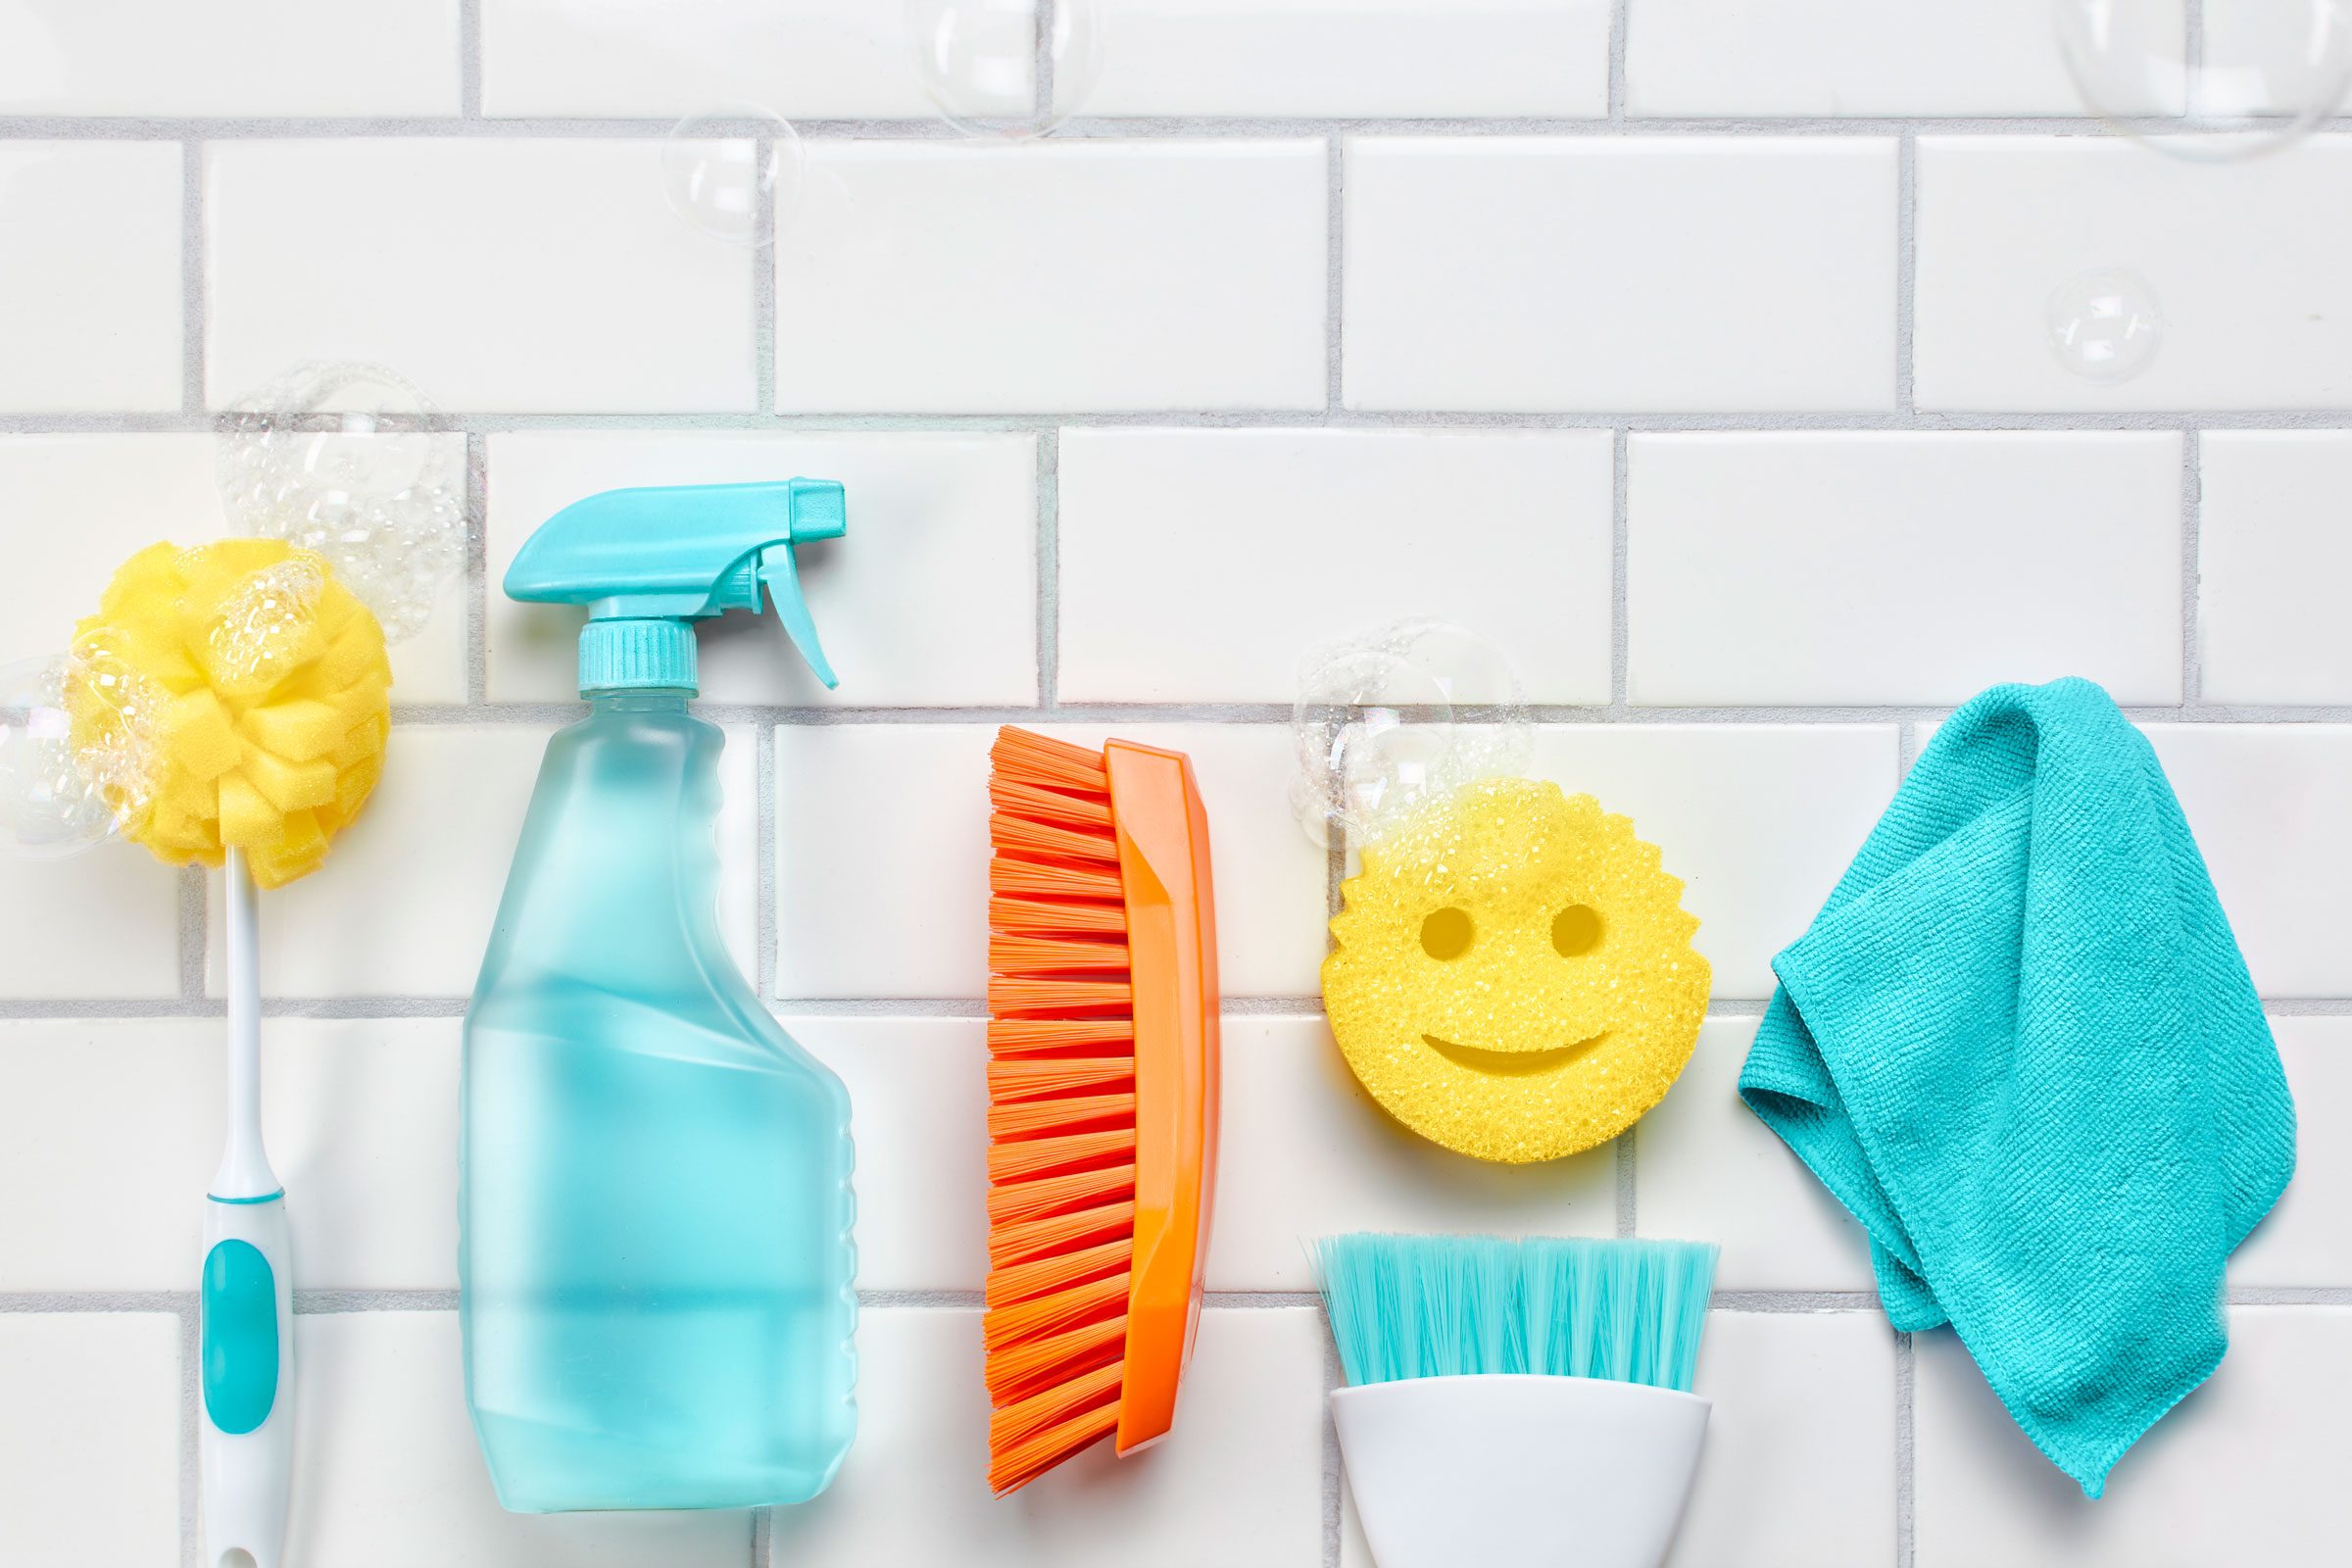 About Cleaning Product Ingredients  The American Cleaning Institute (ACI)